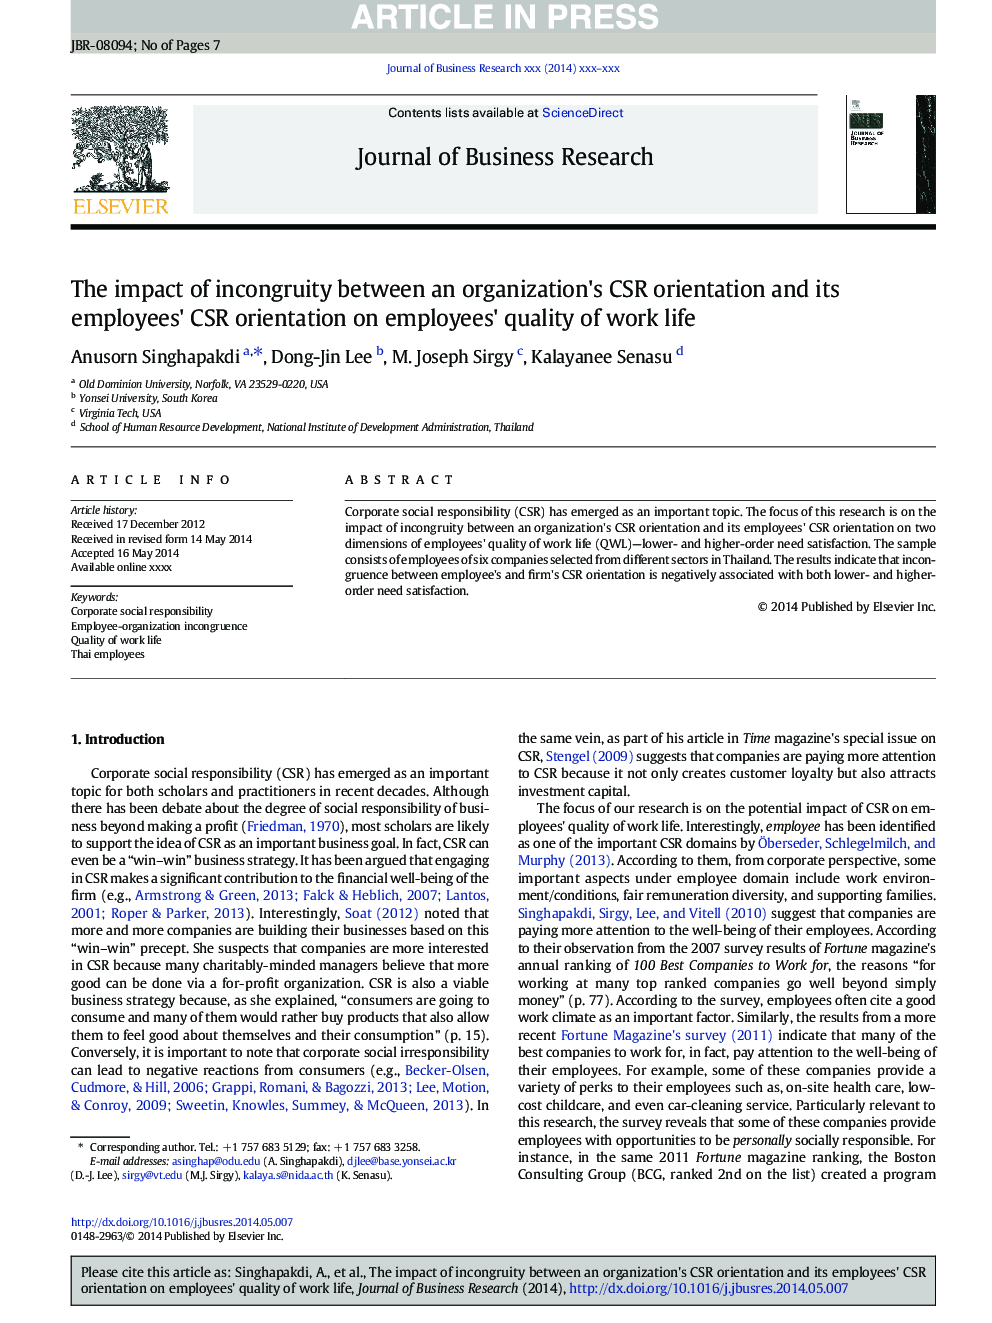 The impact of incongruity between an organization's CSR orientation and its employees' CSR orientation on employees' quality of work life